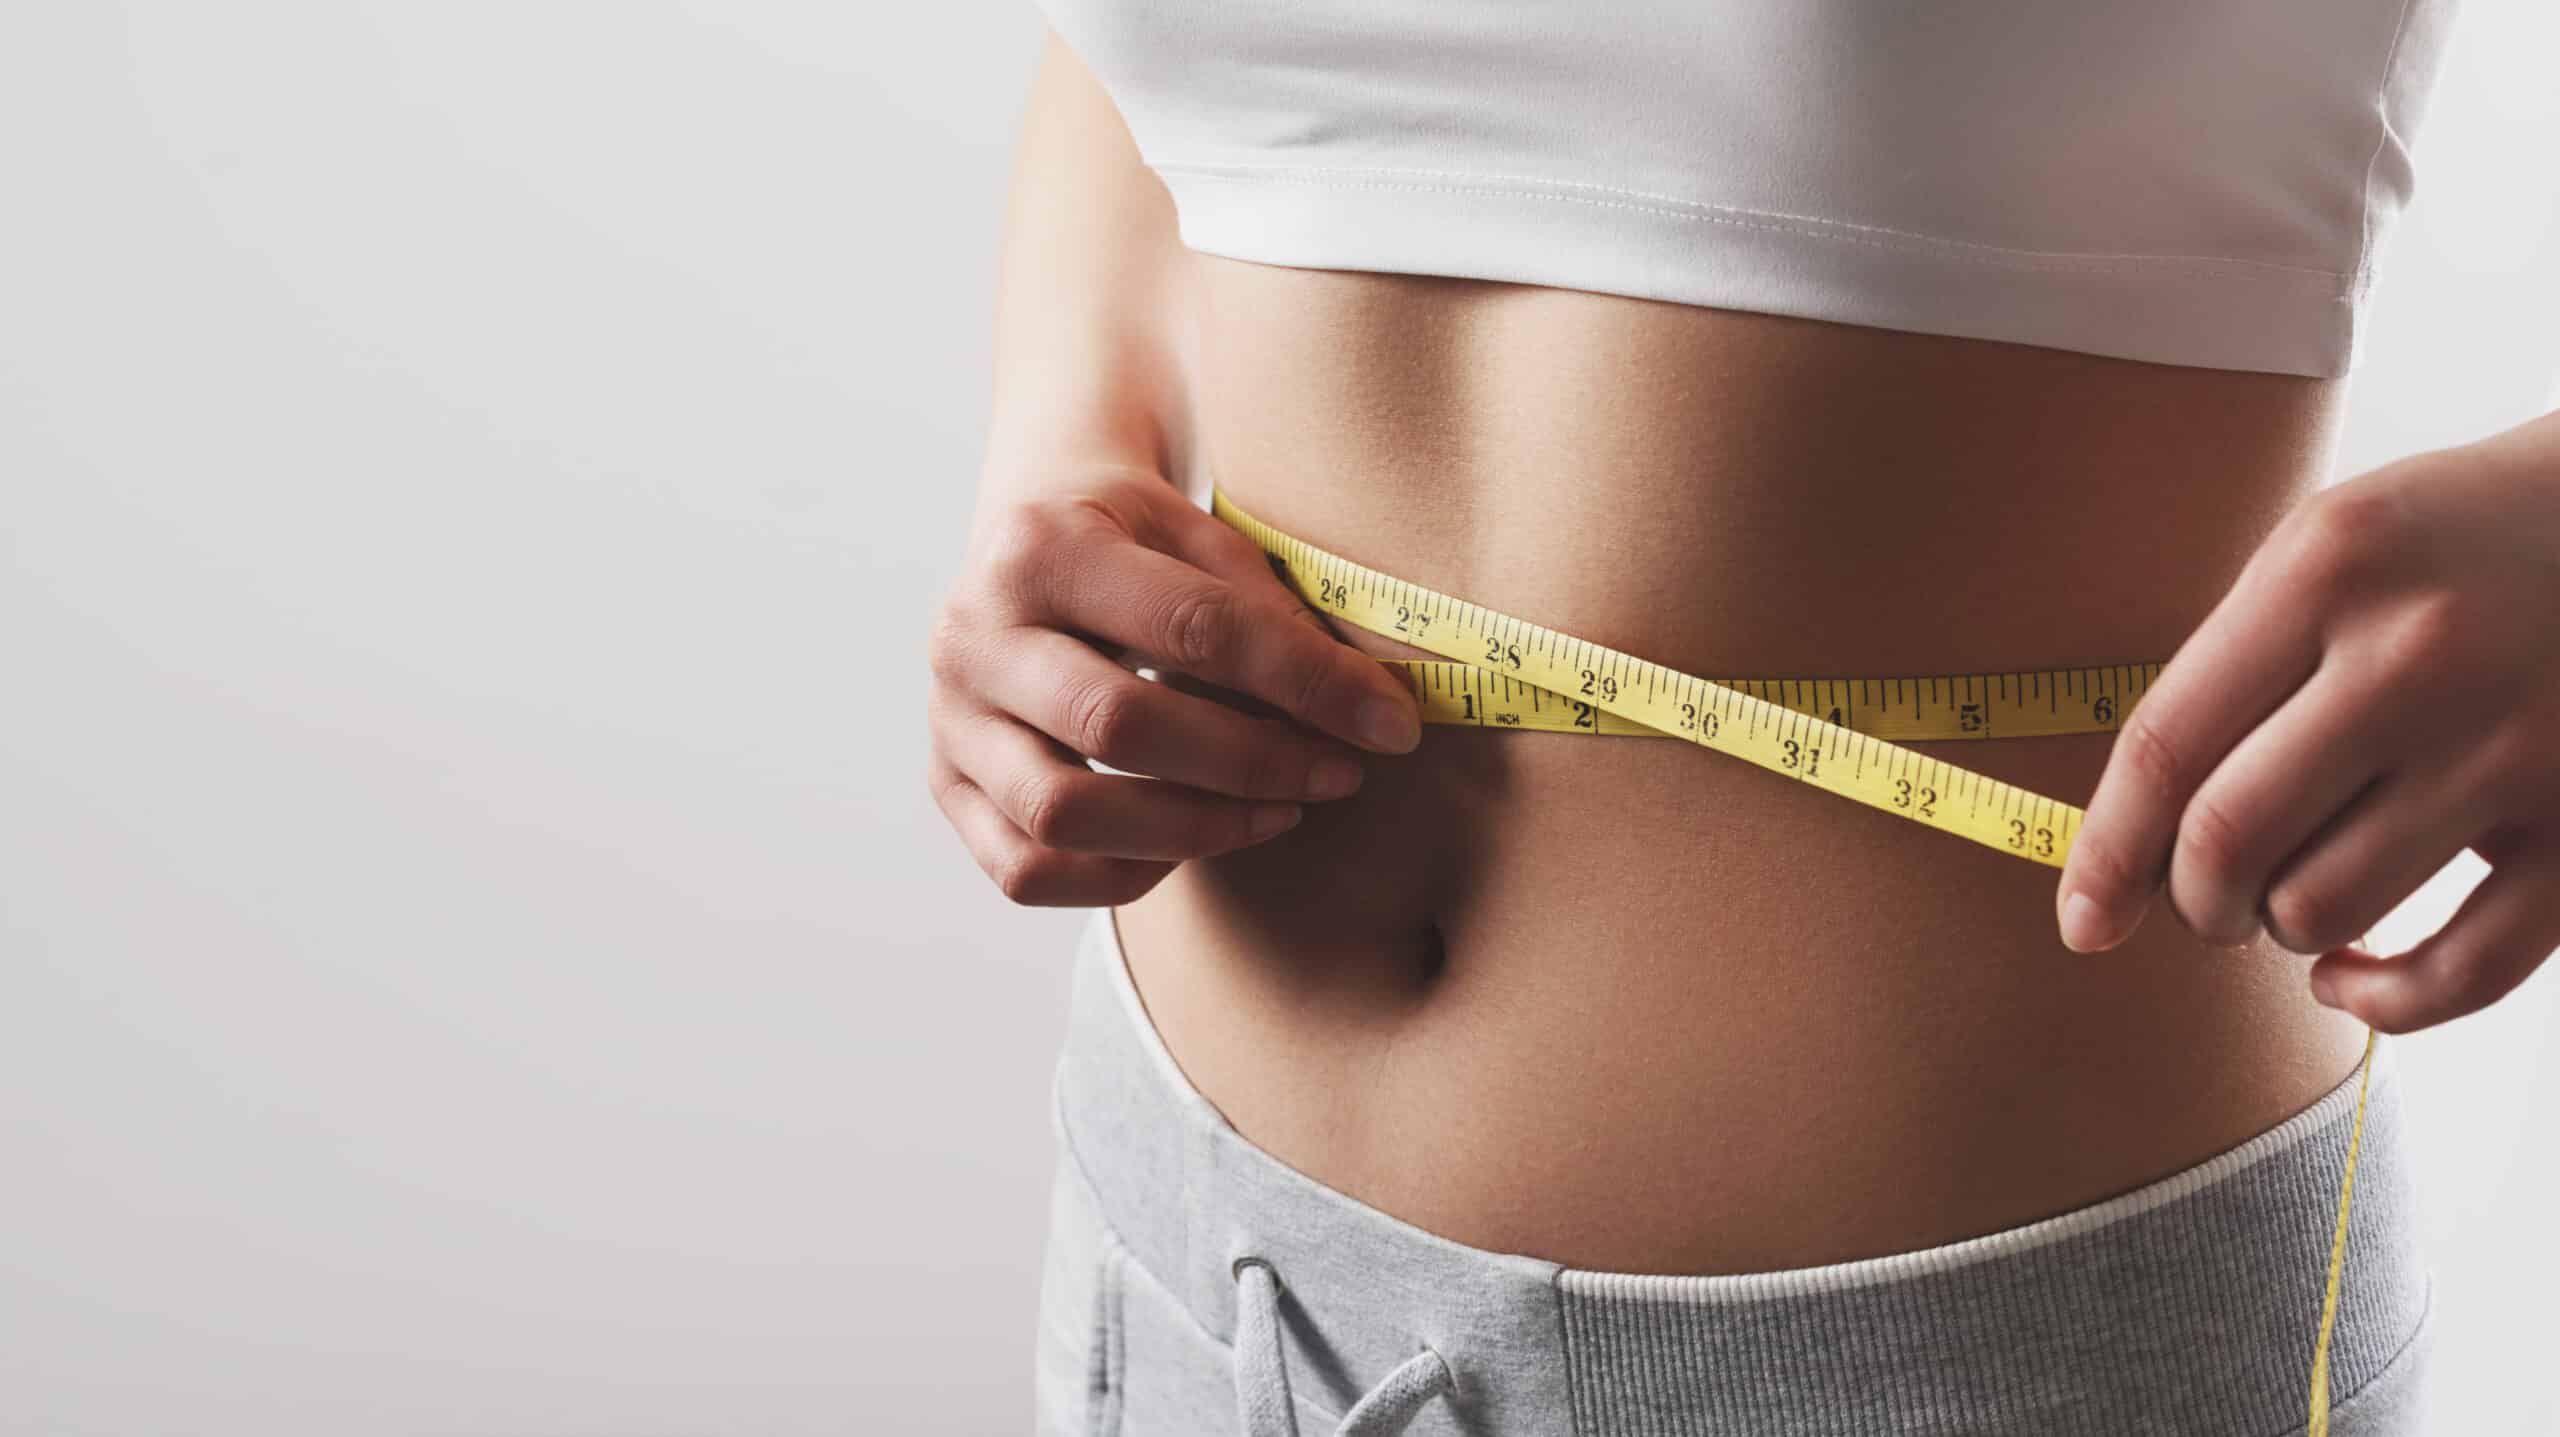 Can You Have a 23 Inch Waist? See How Likely It Is